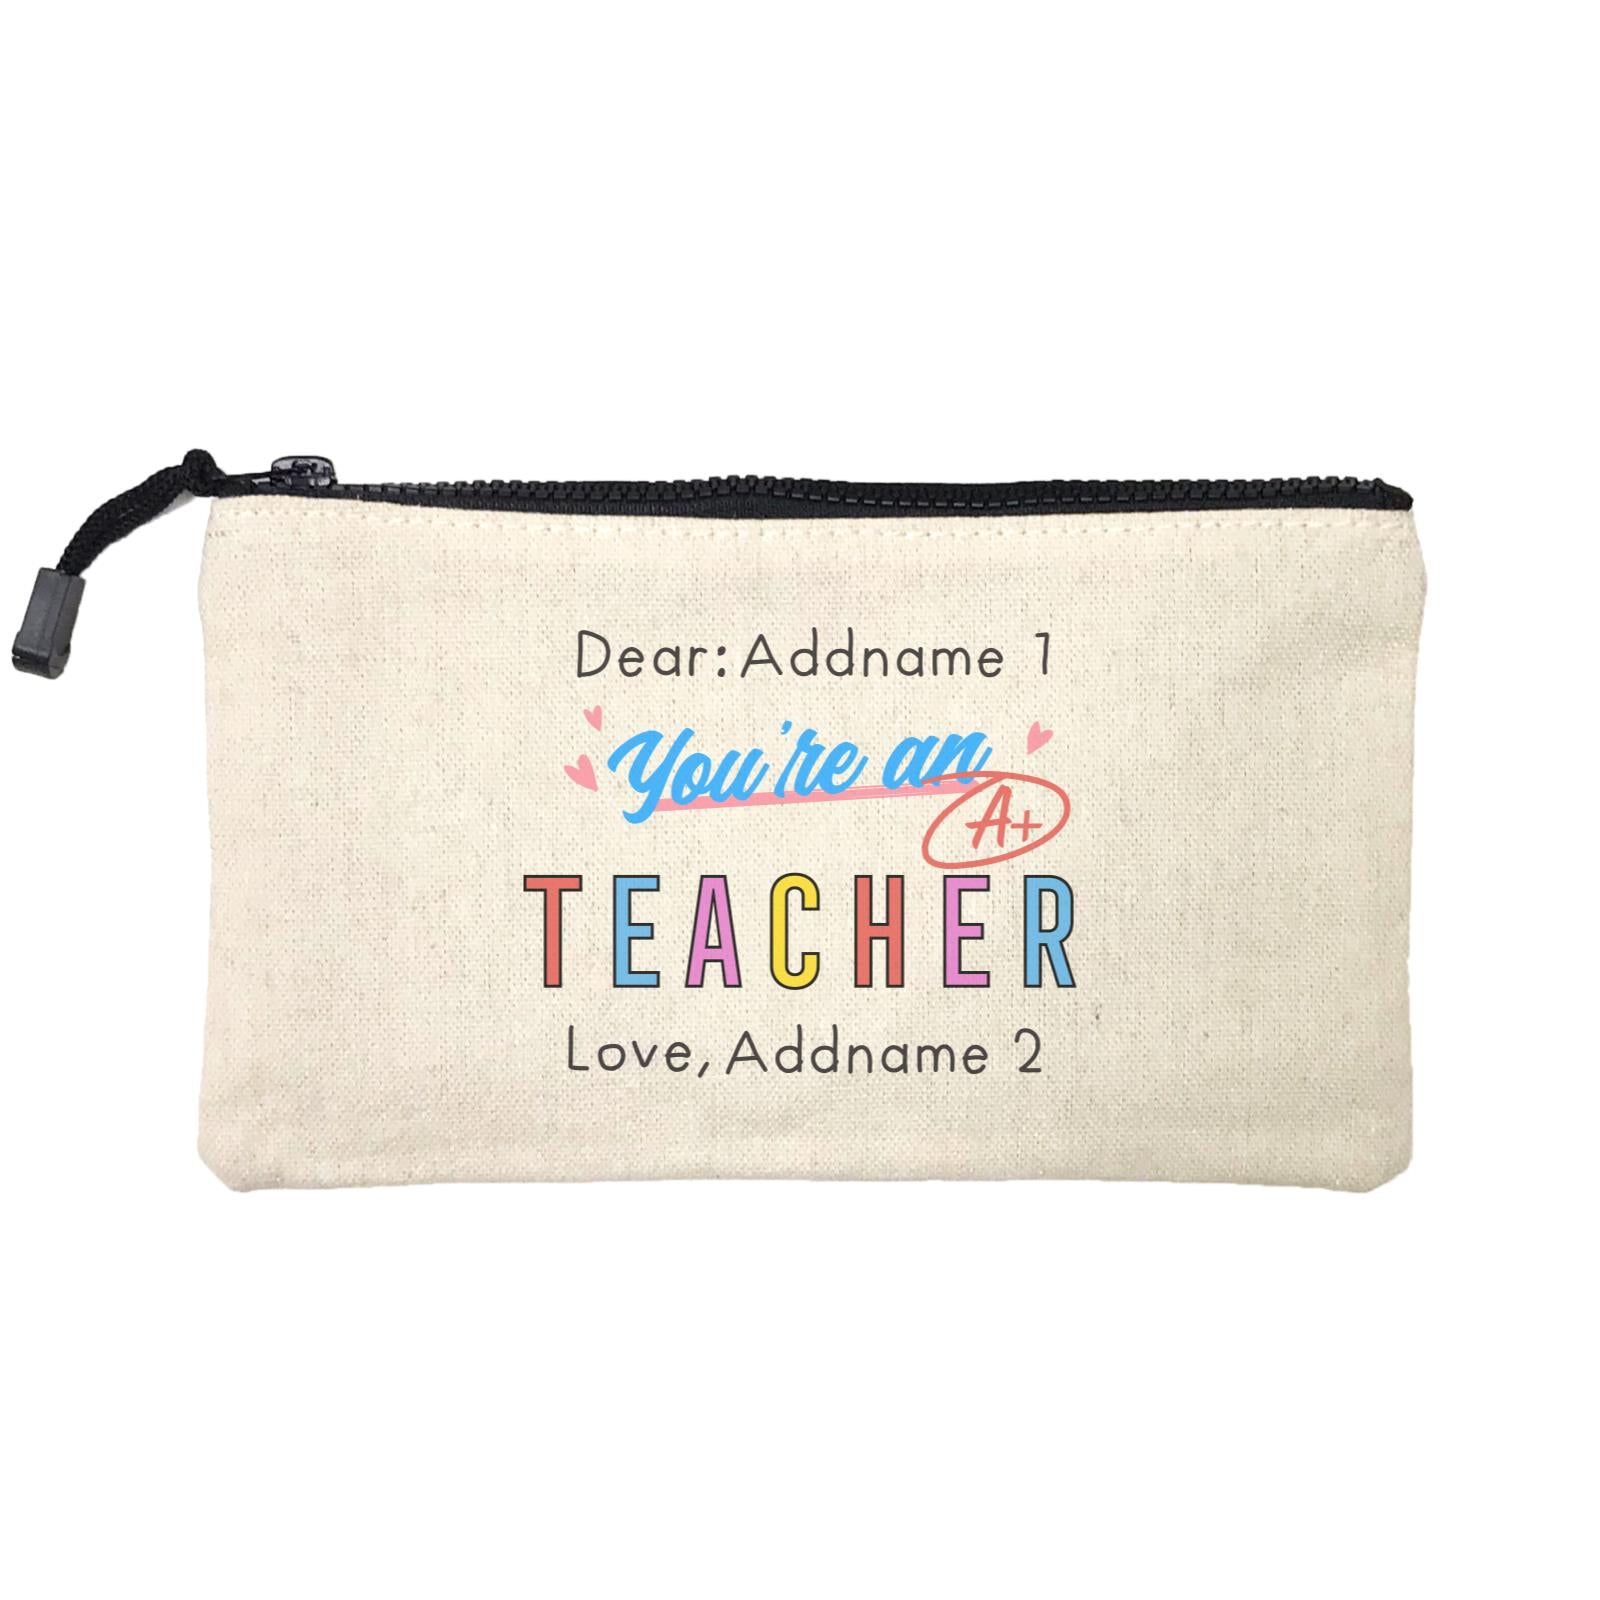 Doodle Series - You're An A+ Teacher Mini Accessories Stationery Pouch